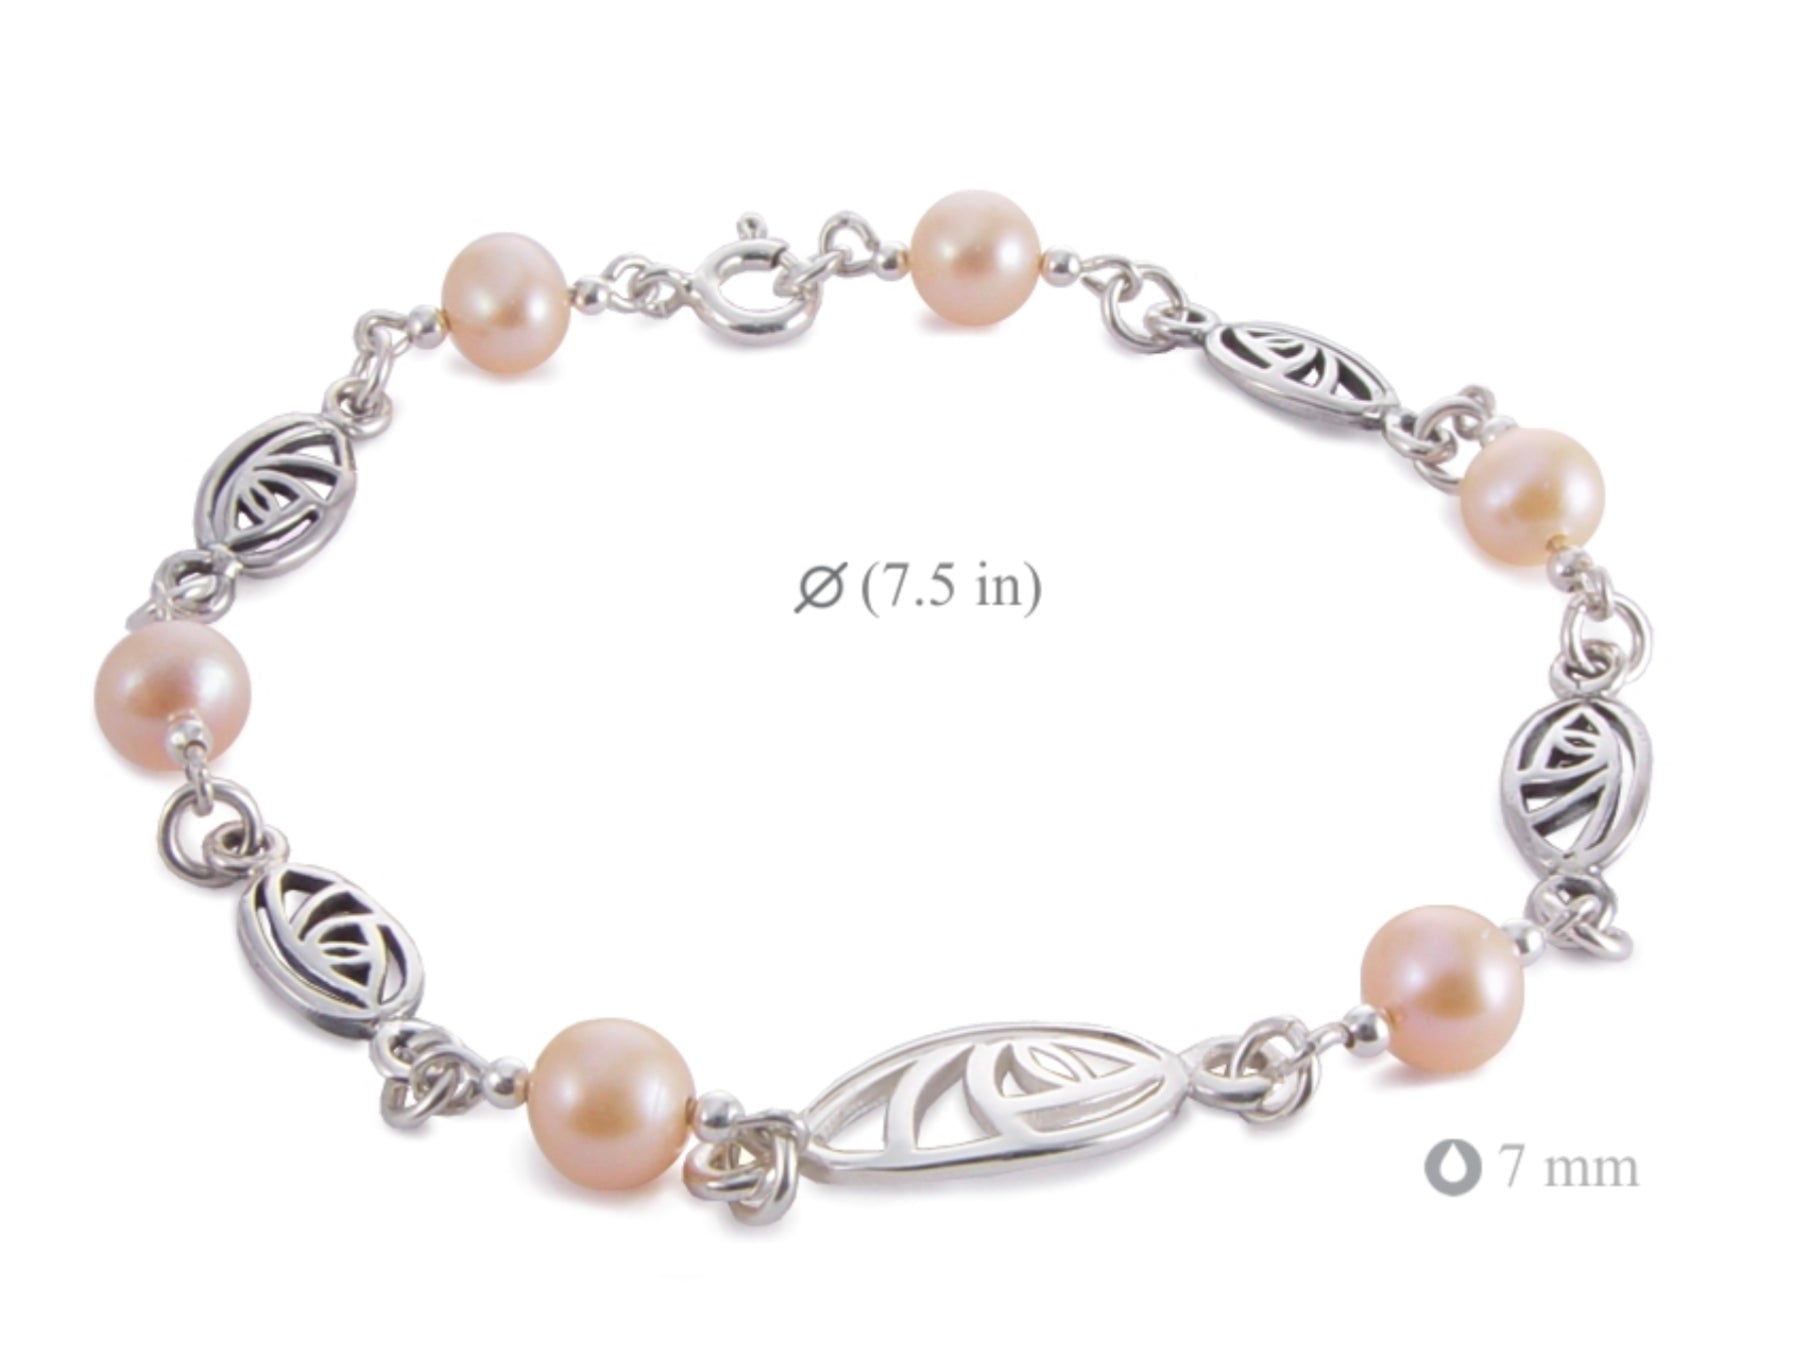 Sterling Silver Mackintosh Bracelet Set with Freshwater Pearls.